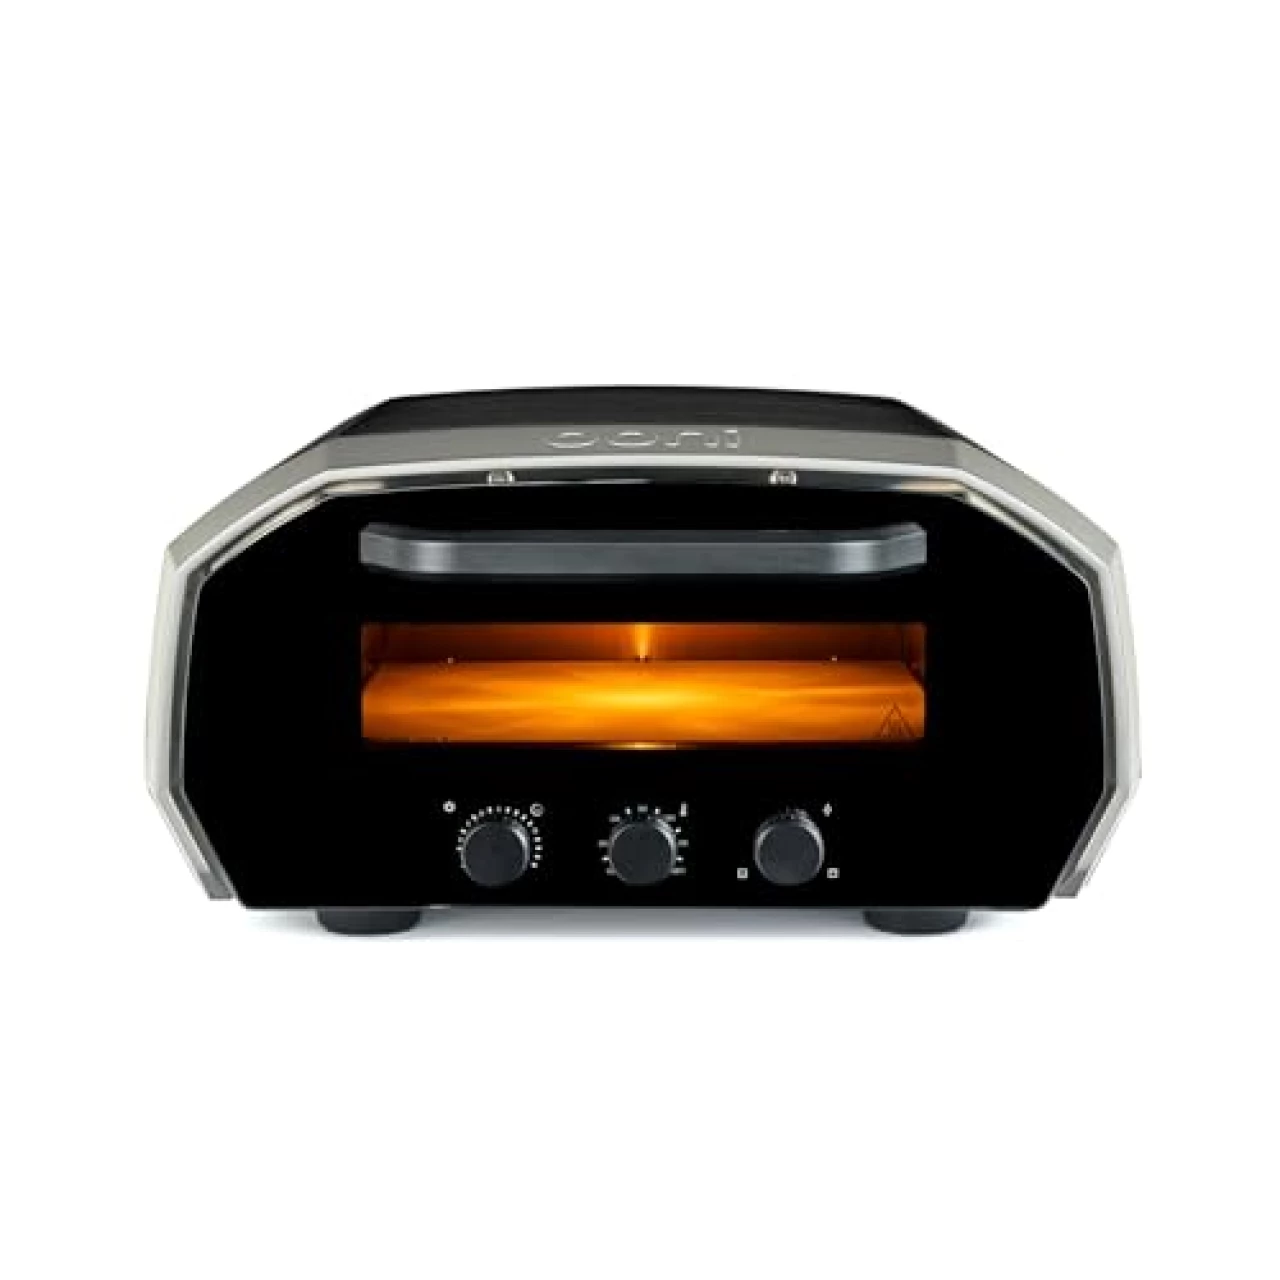 Ooni Volt 12 Electric Pizza Oven - Indoor &amp; Outdoor Versatile Oven, Pizza Cooker with Pizza Stone, Indoor and Outdoor Toaster Oven Countertop, Portable Pizza Oven, Cook 12 Inch Pizzas and More